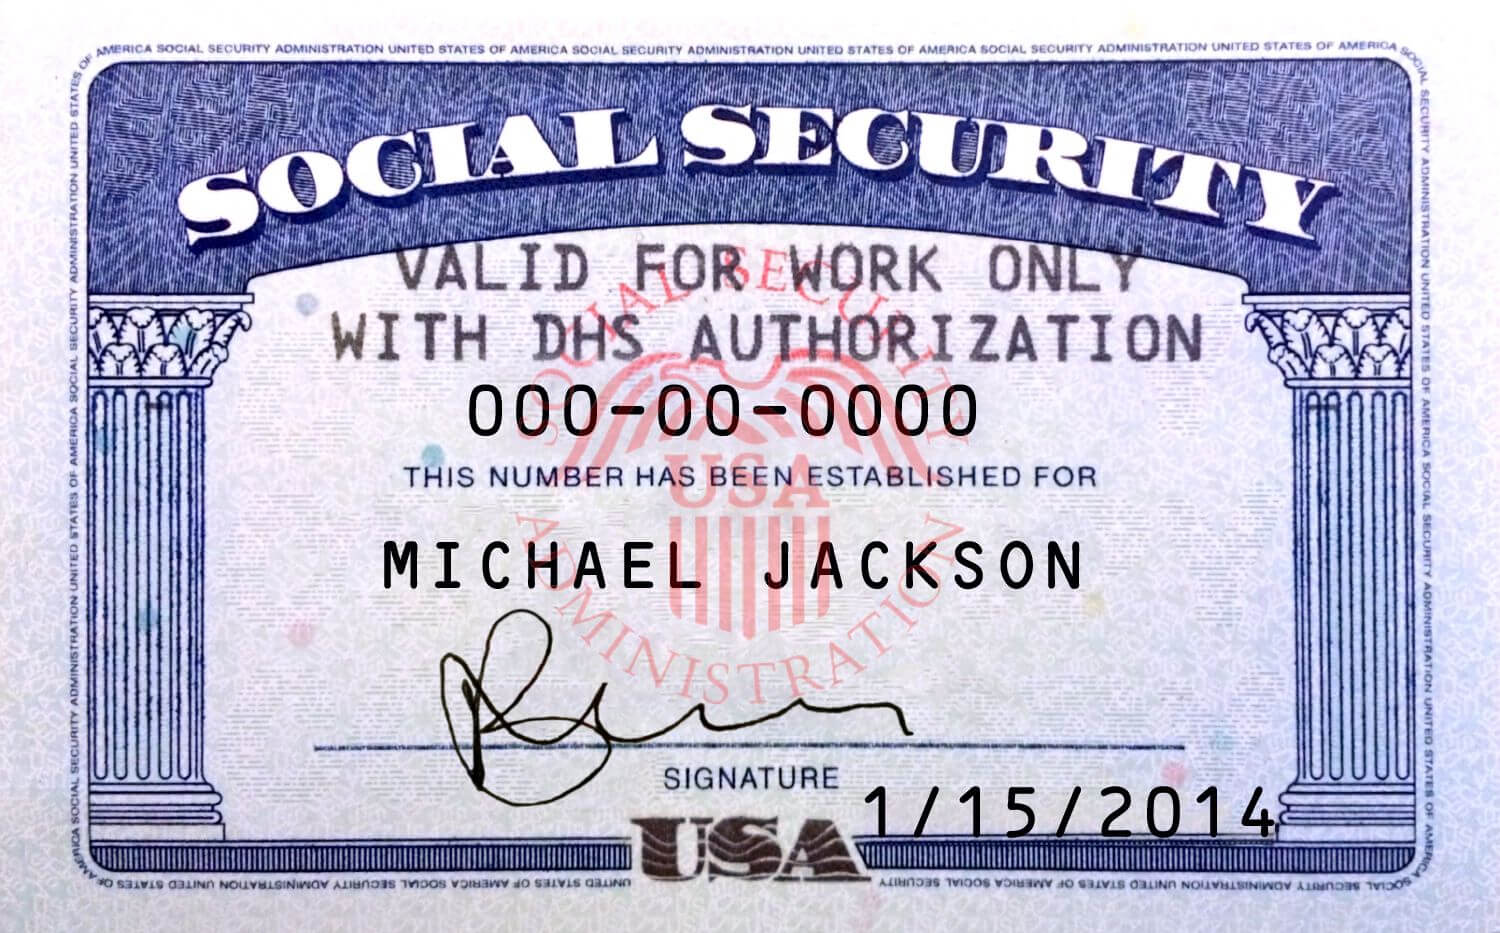 This Is Ssn Card (Usa) Psd (Photoshop) Template. On This Psd With Regard To Ssn Card Template